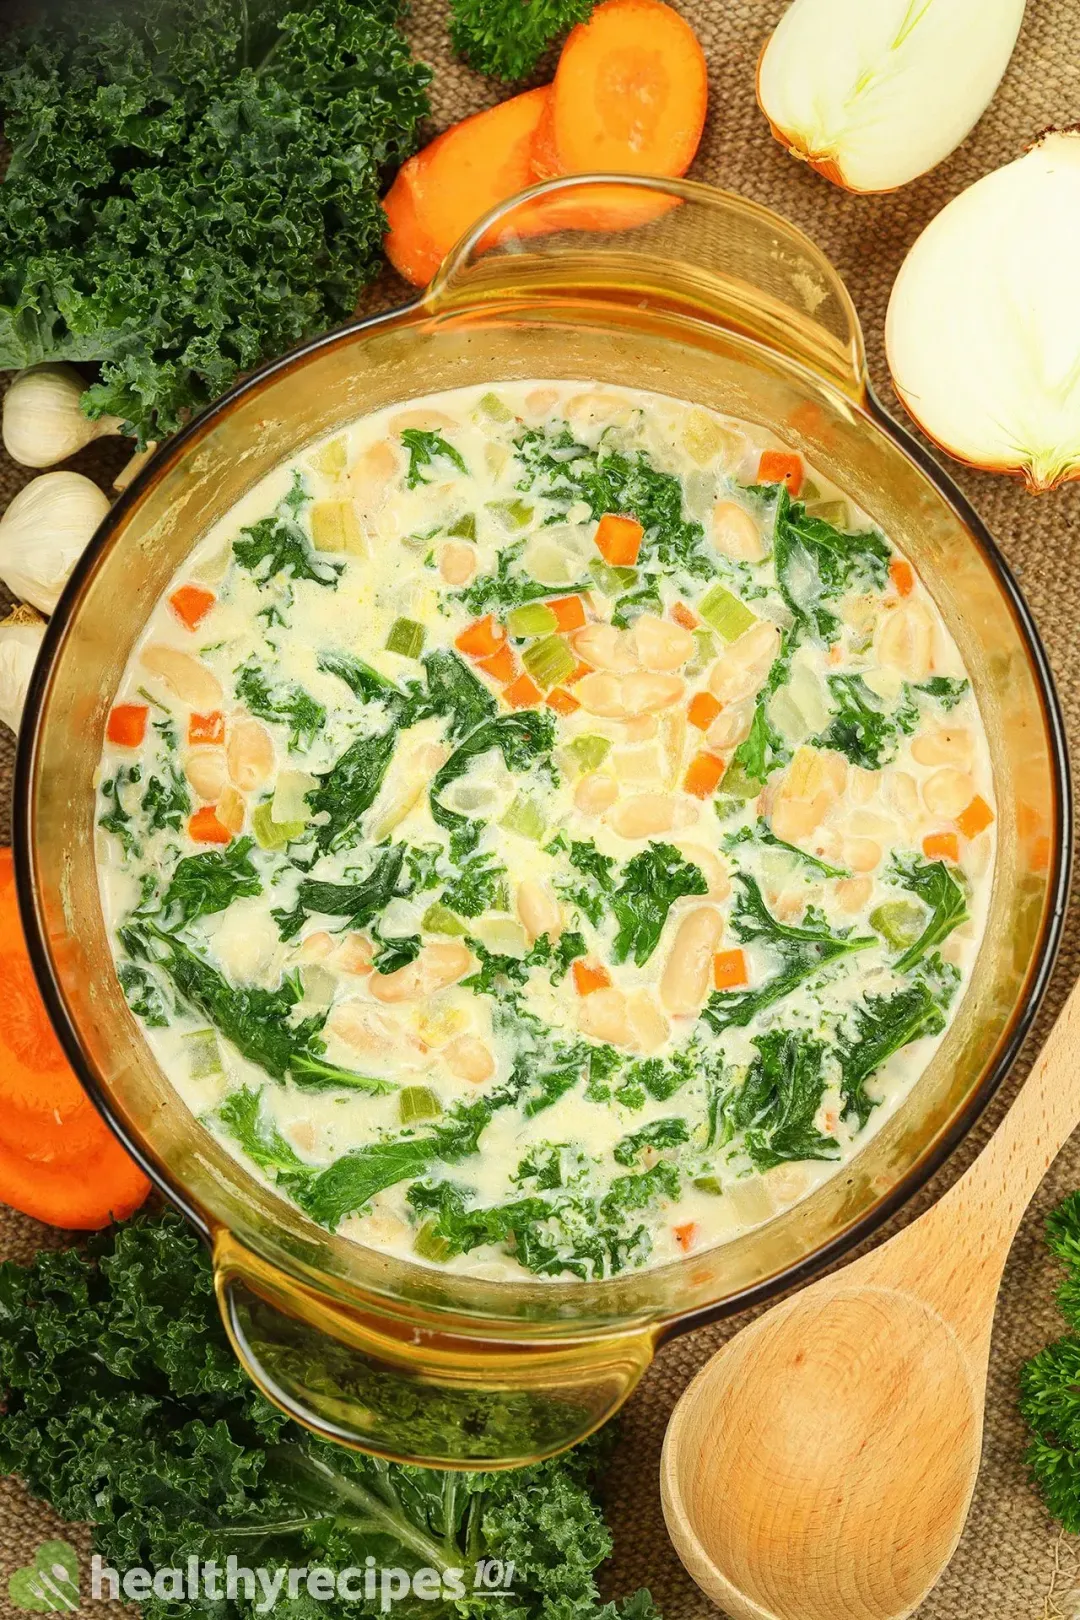 Is White Bean and Kale Soup Healthy